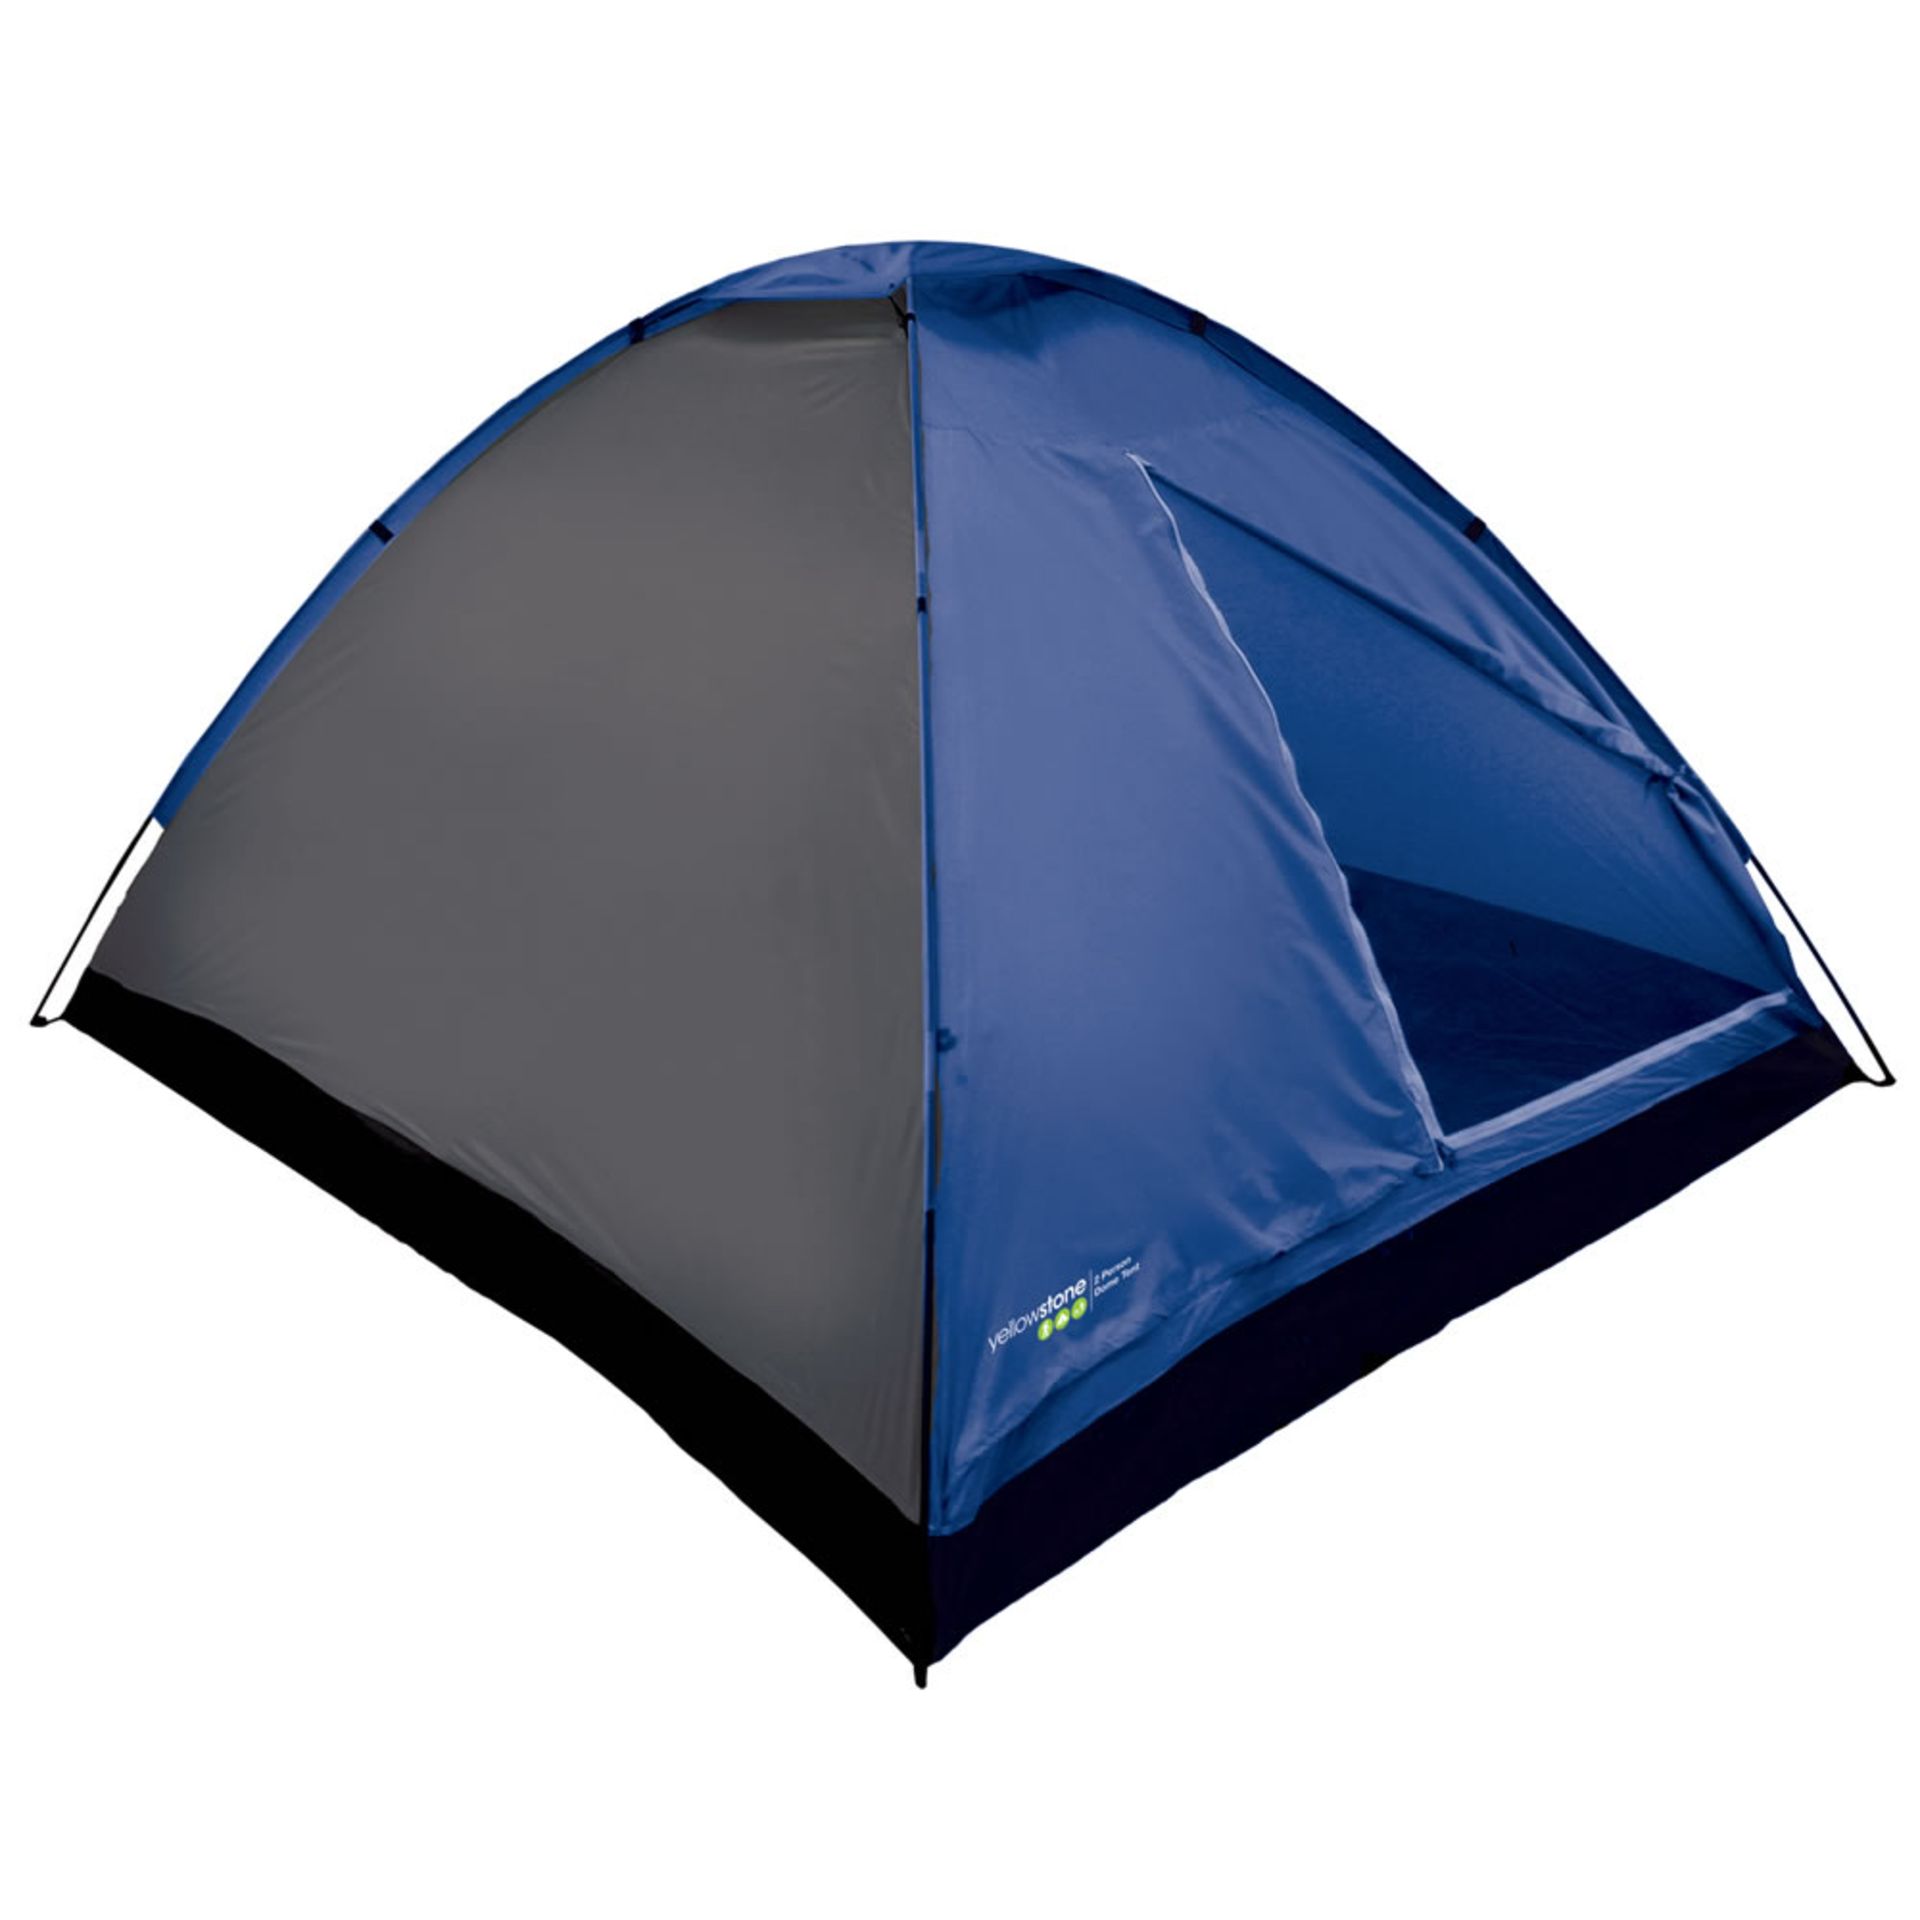 V Two Person Dome Tent X 10  Bid price to be multiplied by Ten